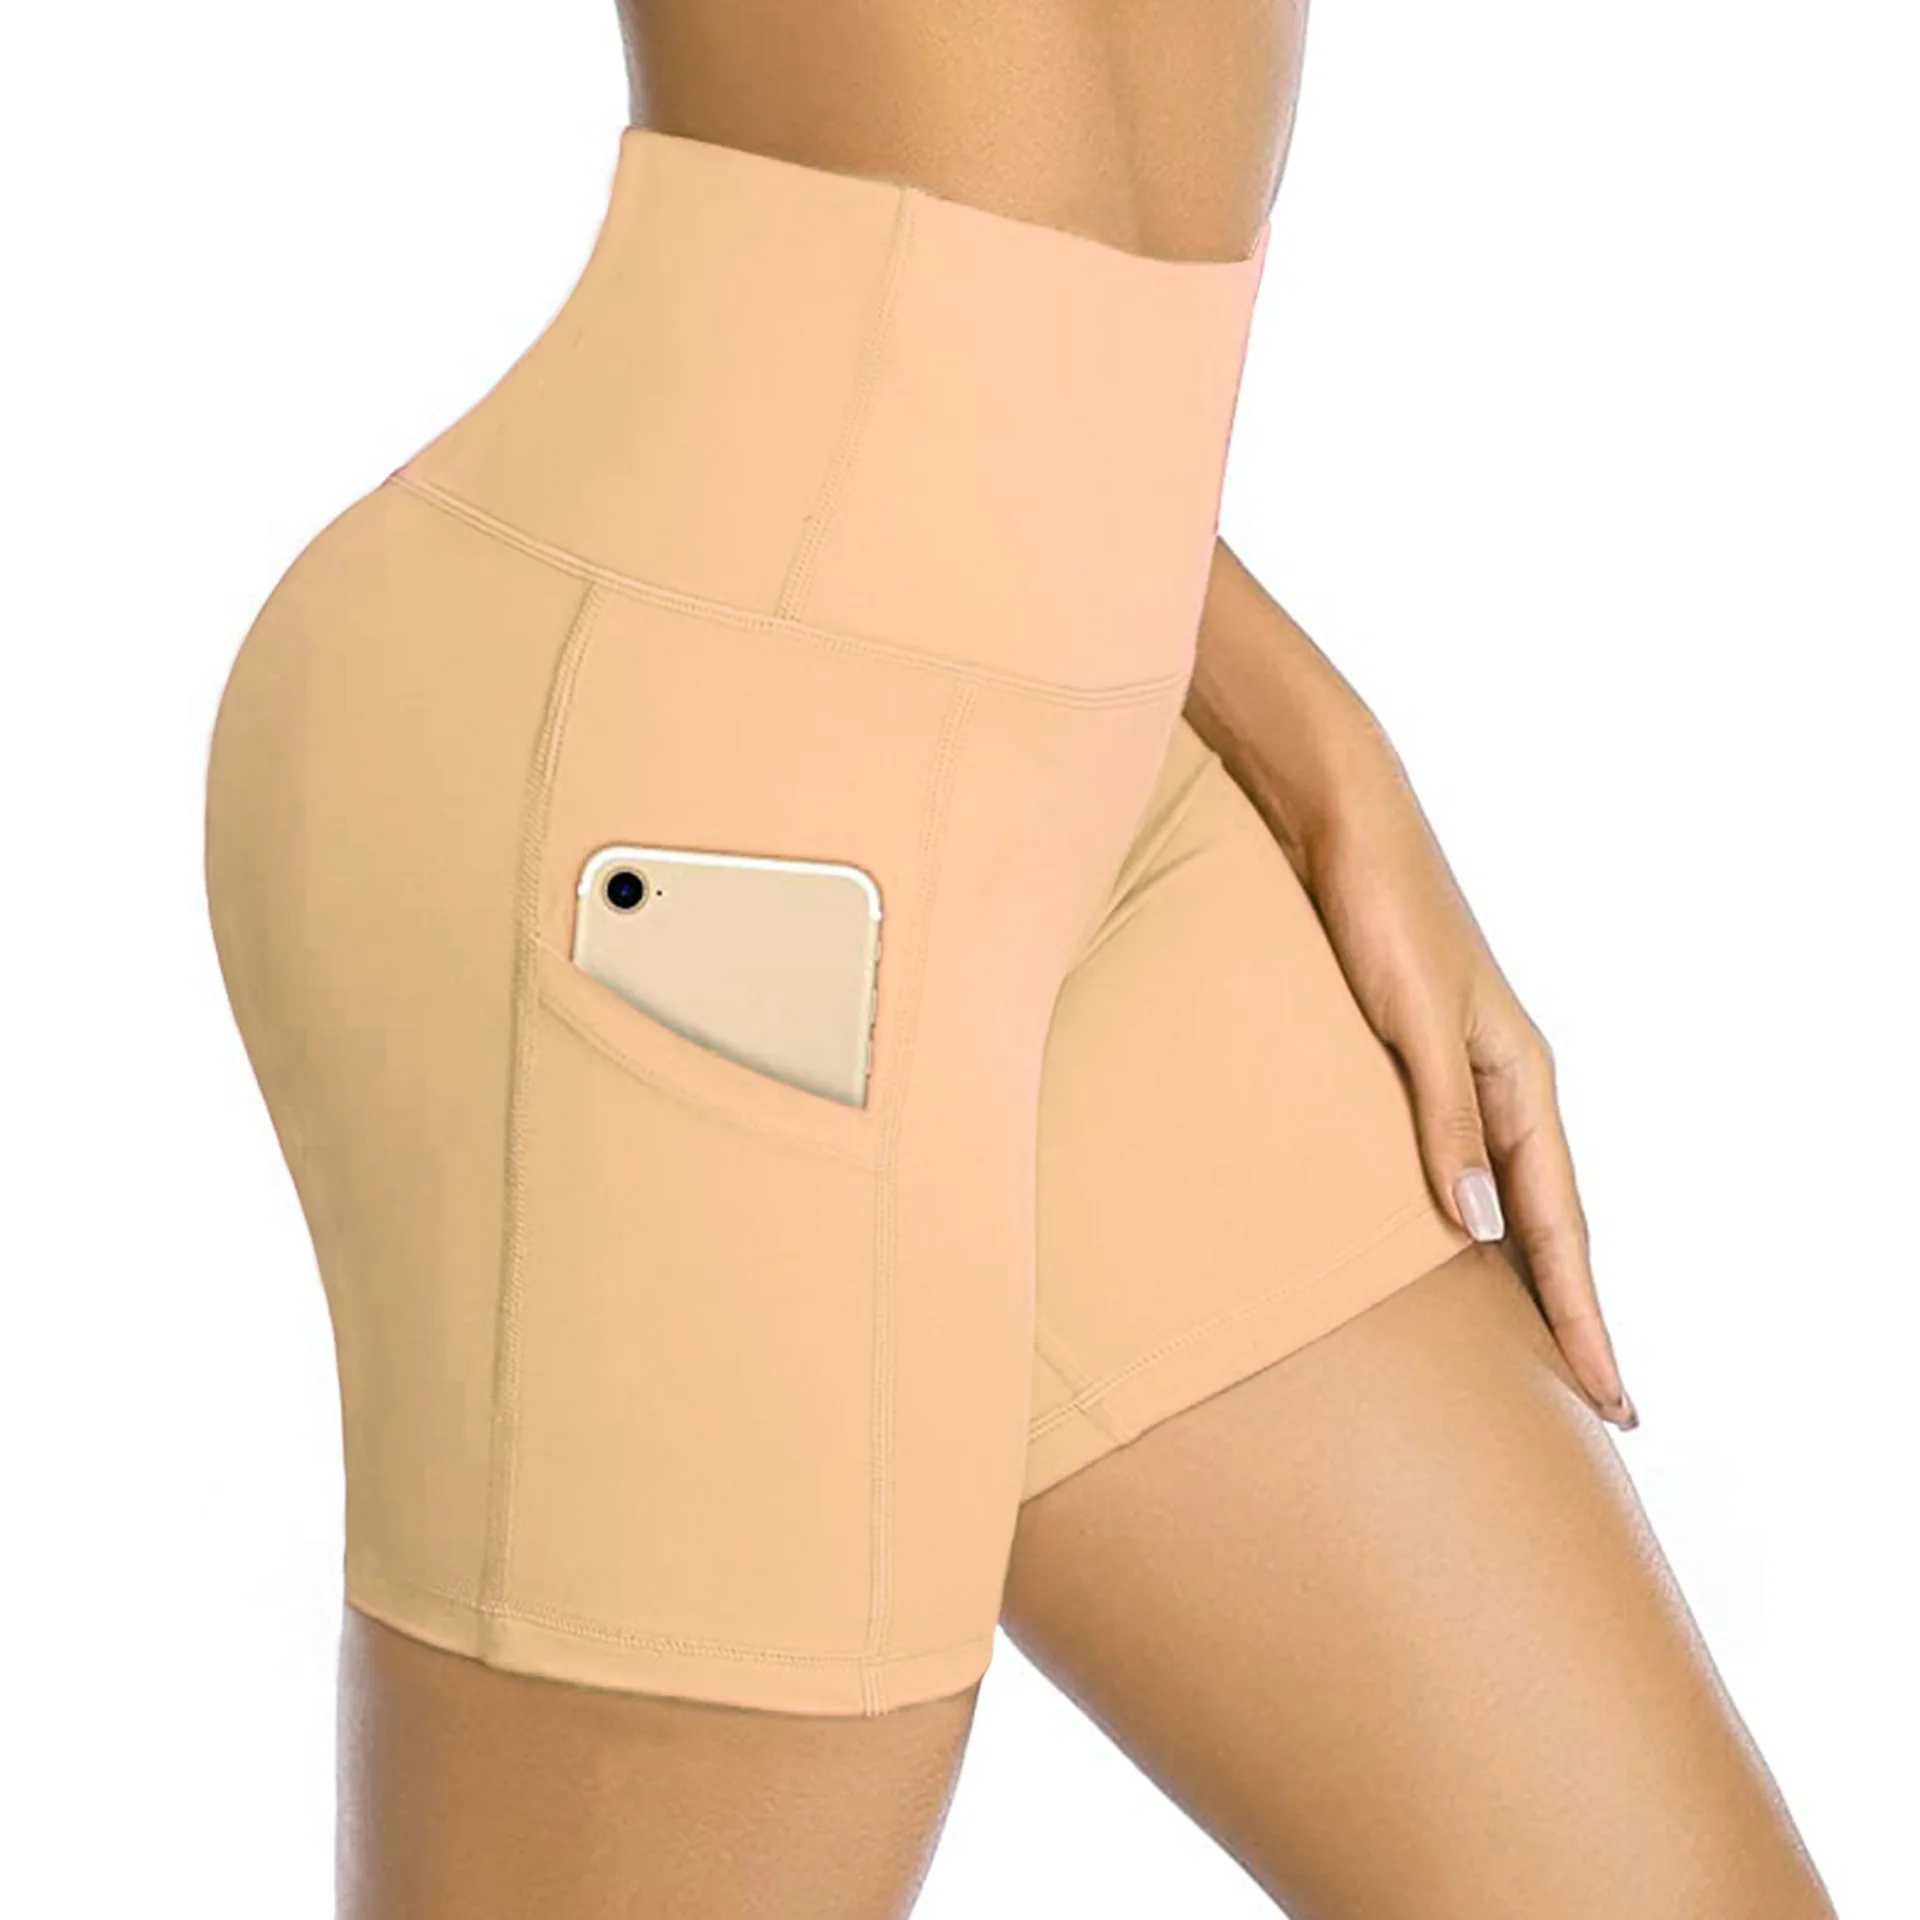 
Woman High Waist Tights Quick-drying Running Sports Fitness Shorts with pocket 